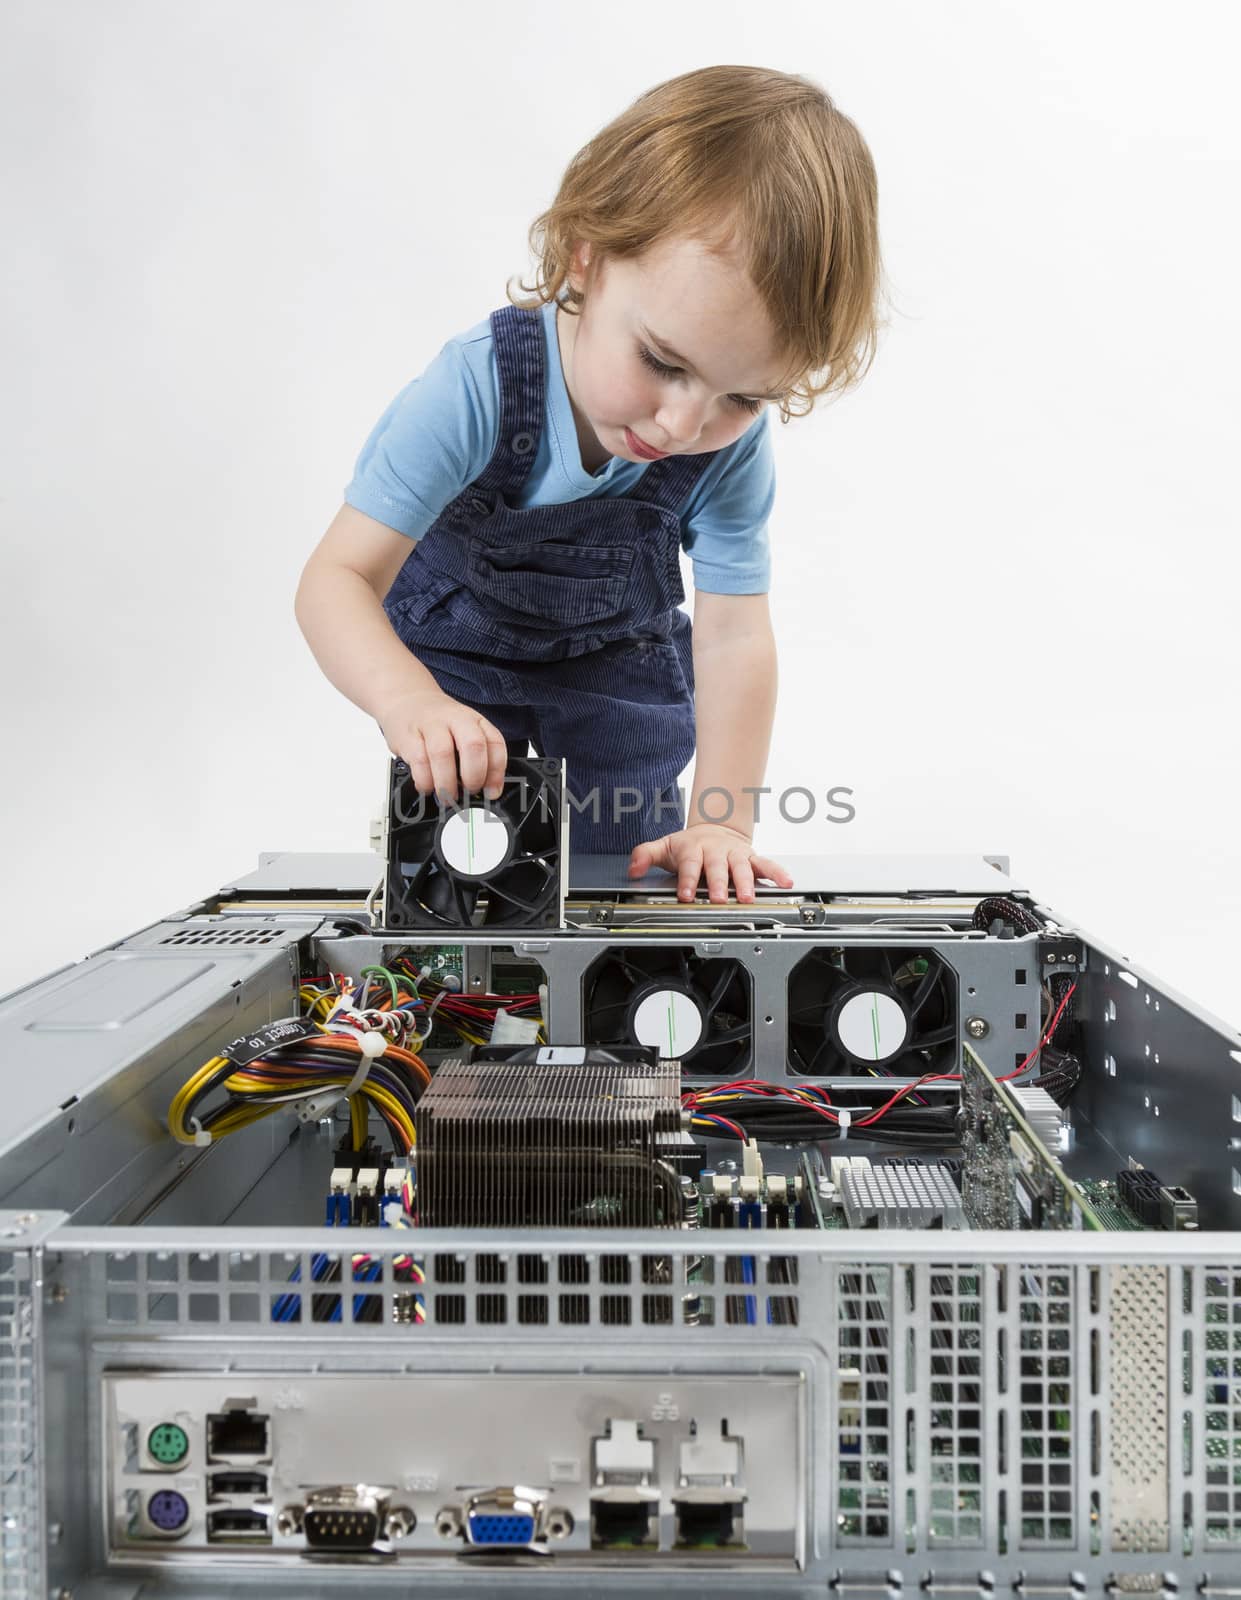 cute child with open network server. studio shot in light grey background